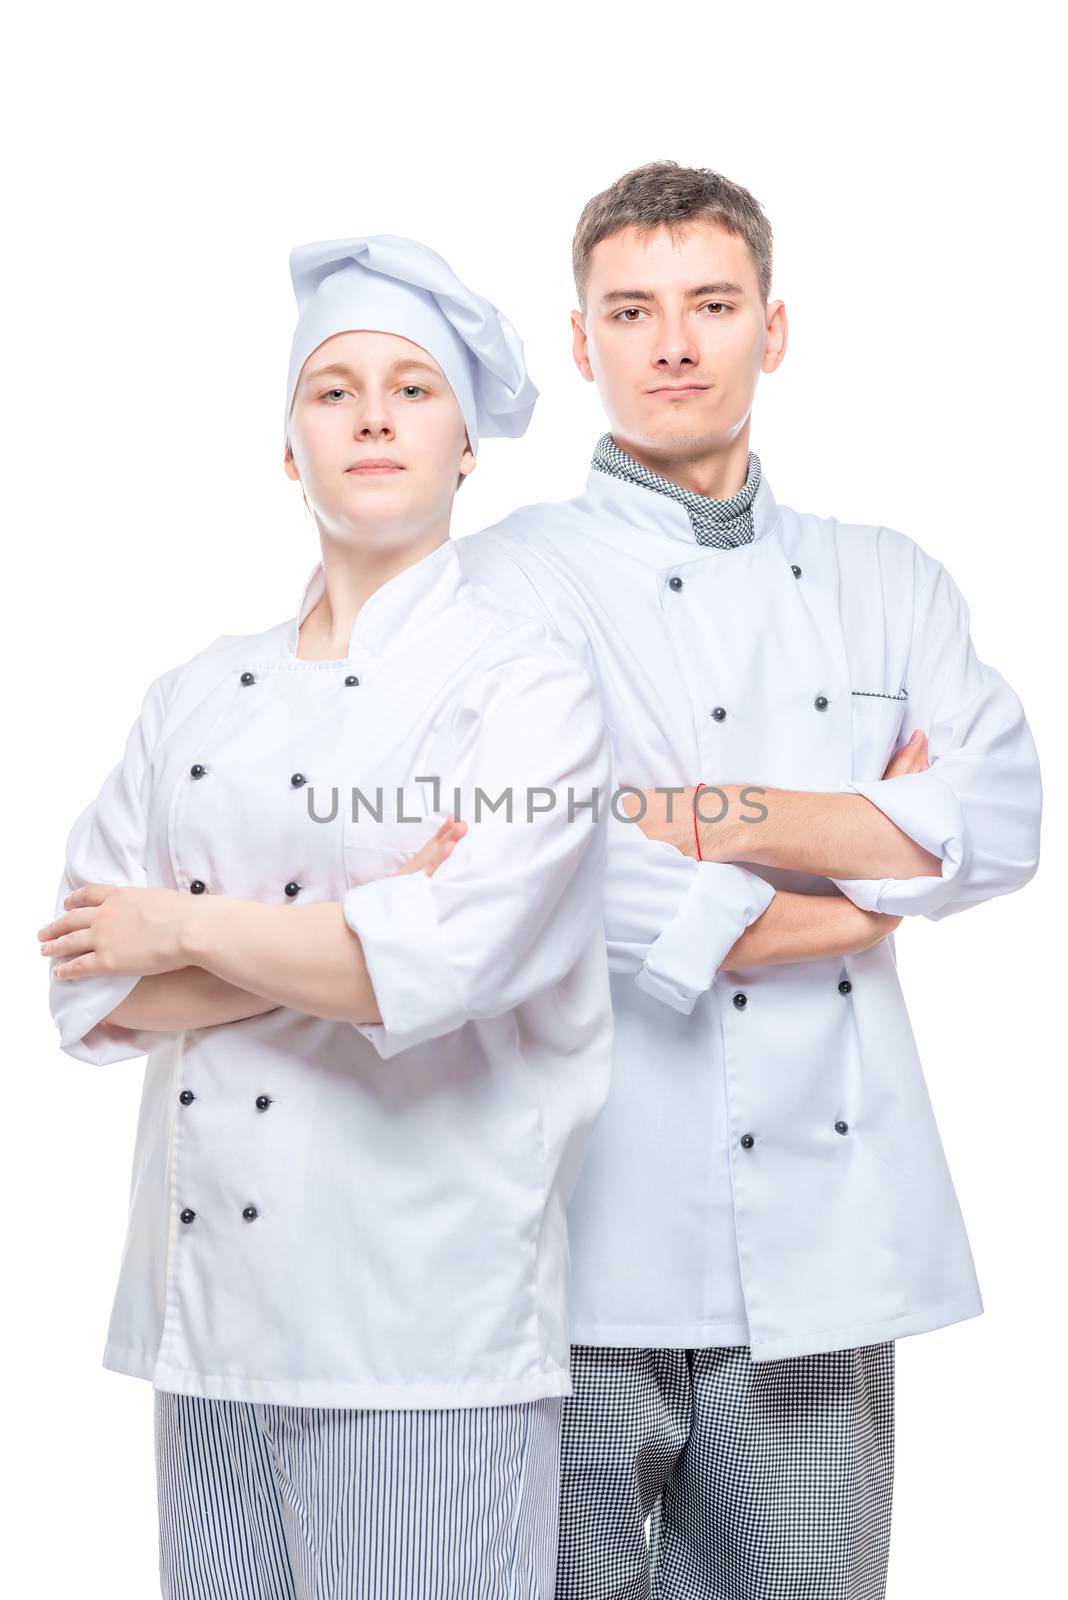 portrait of a successful team of professional chefs in suits against white background